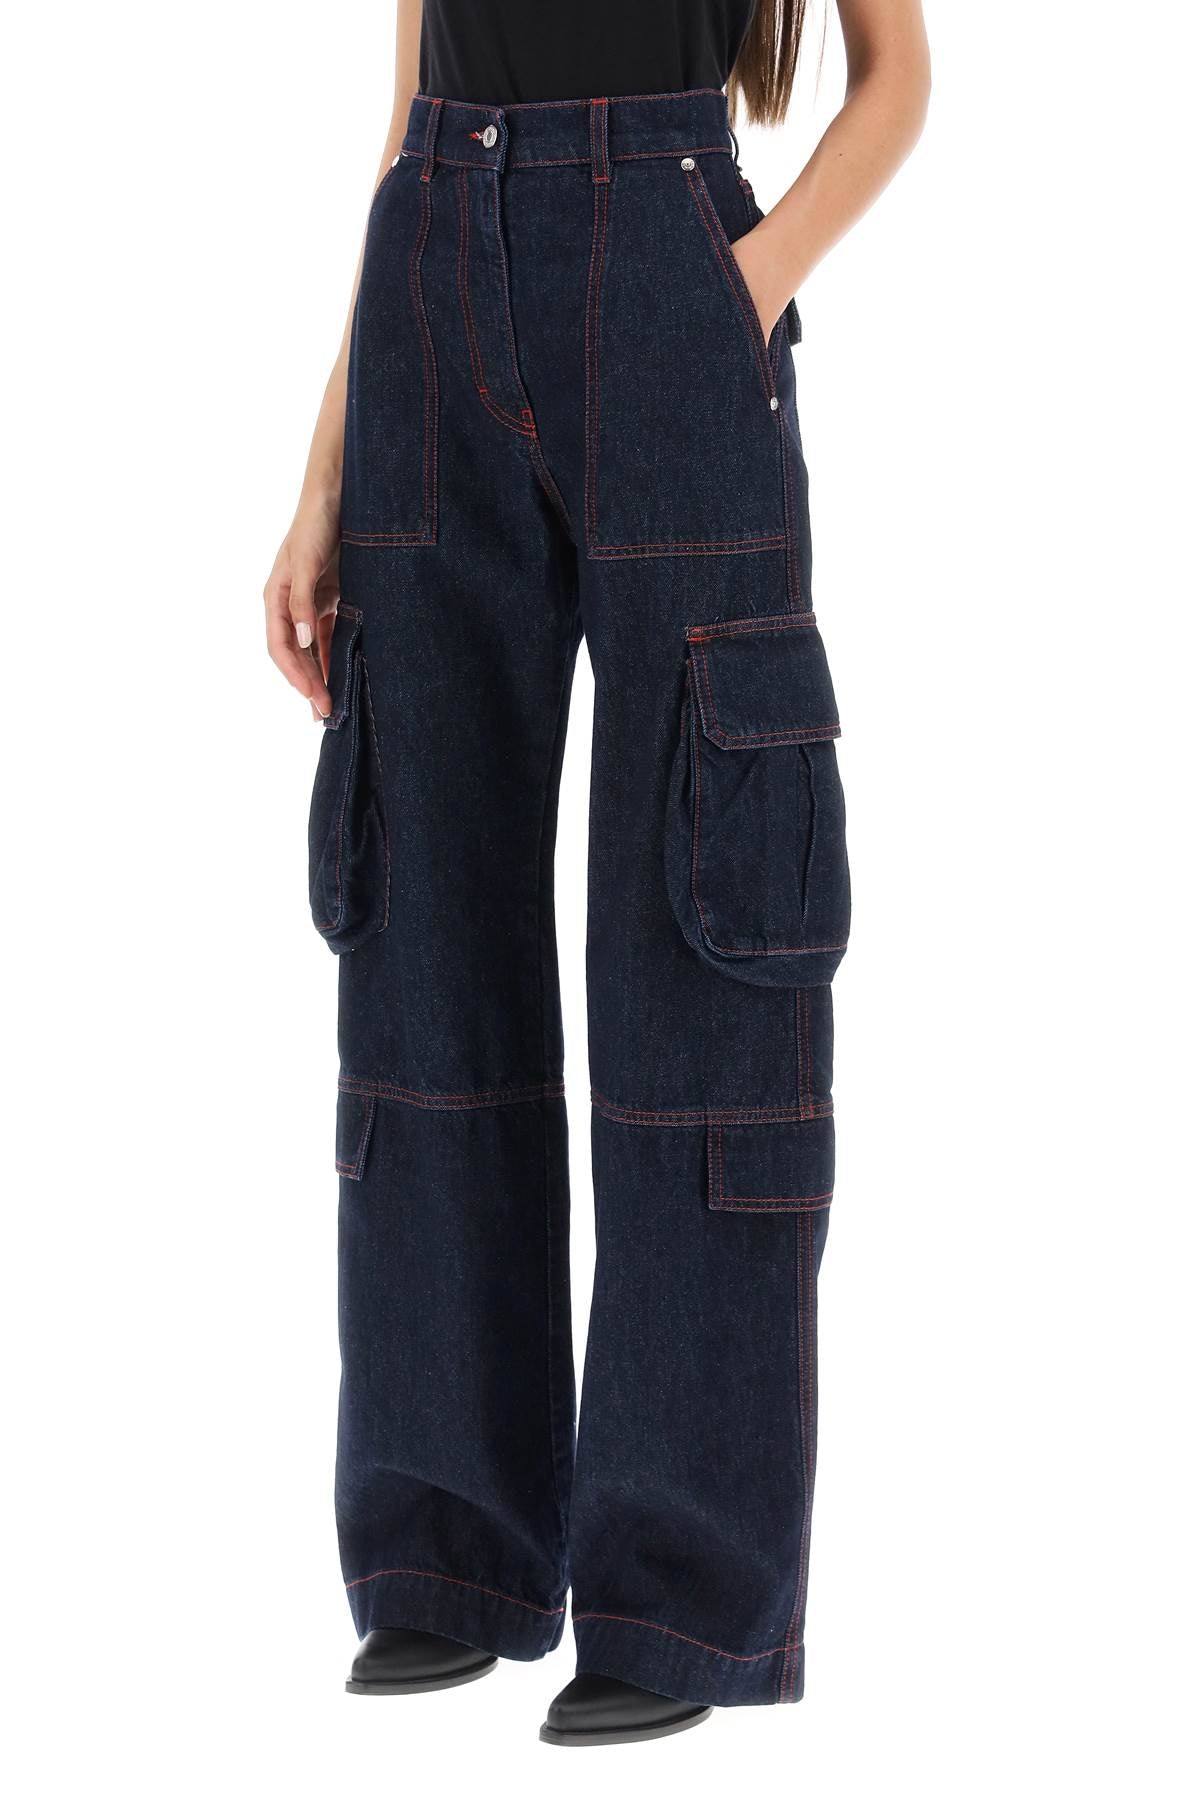 Msgm cargo jeans with flared cut-3